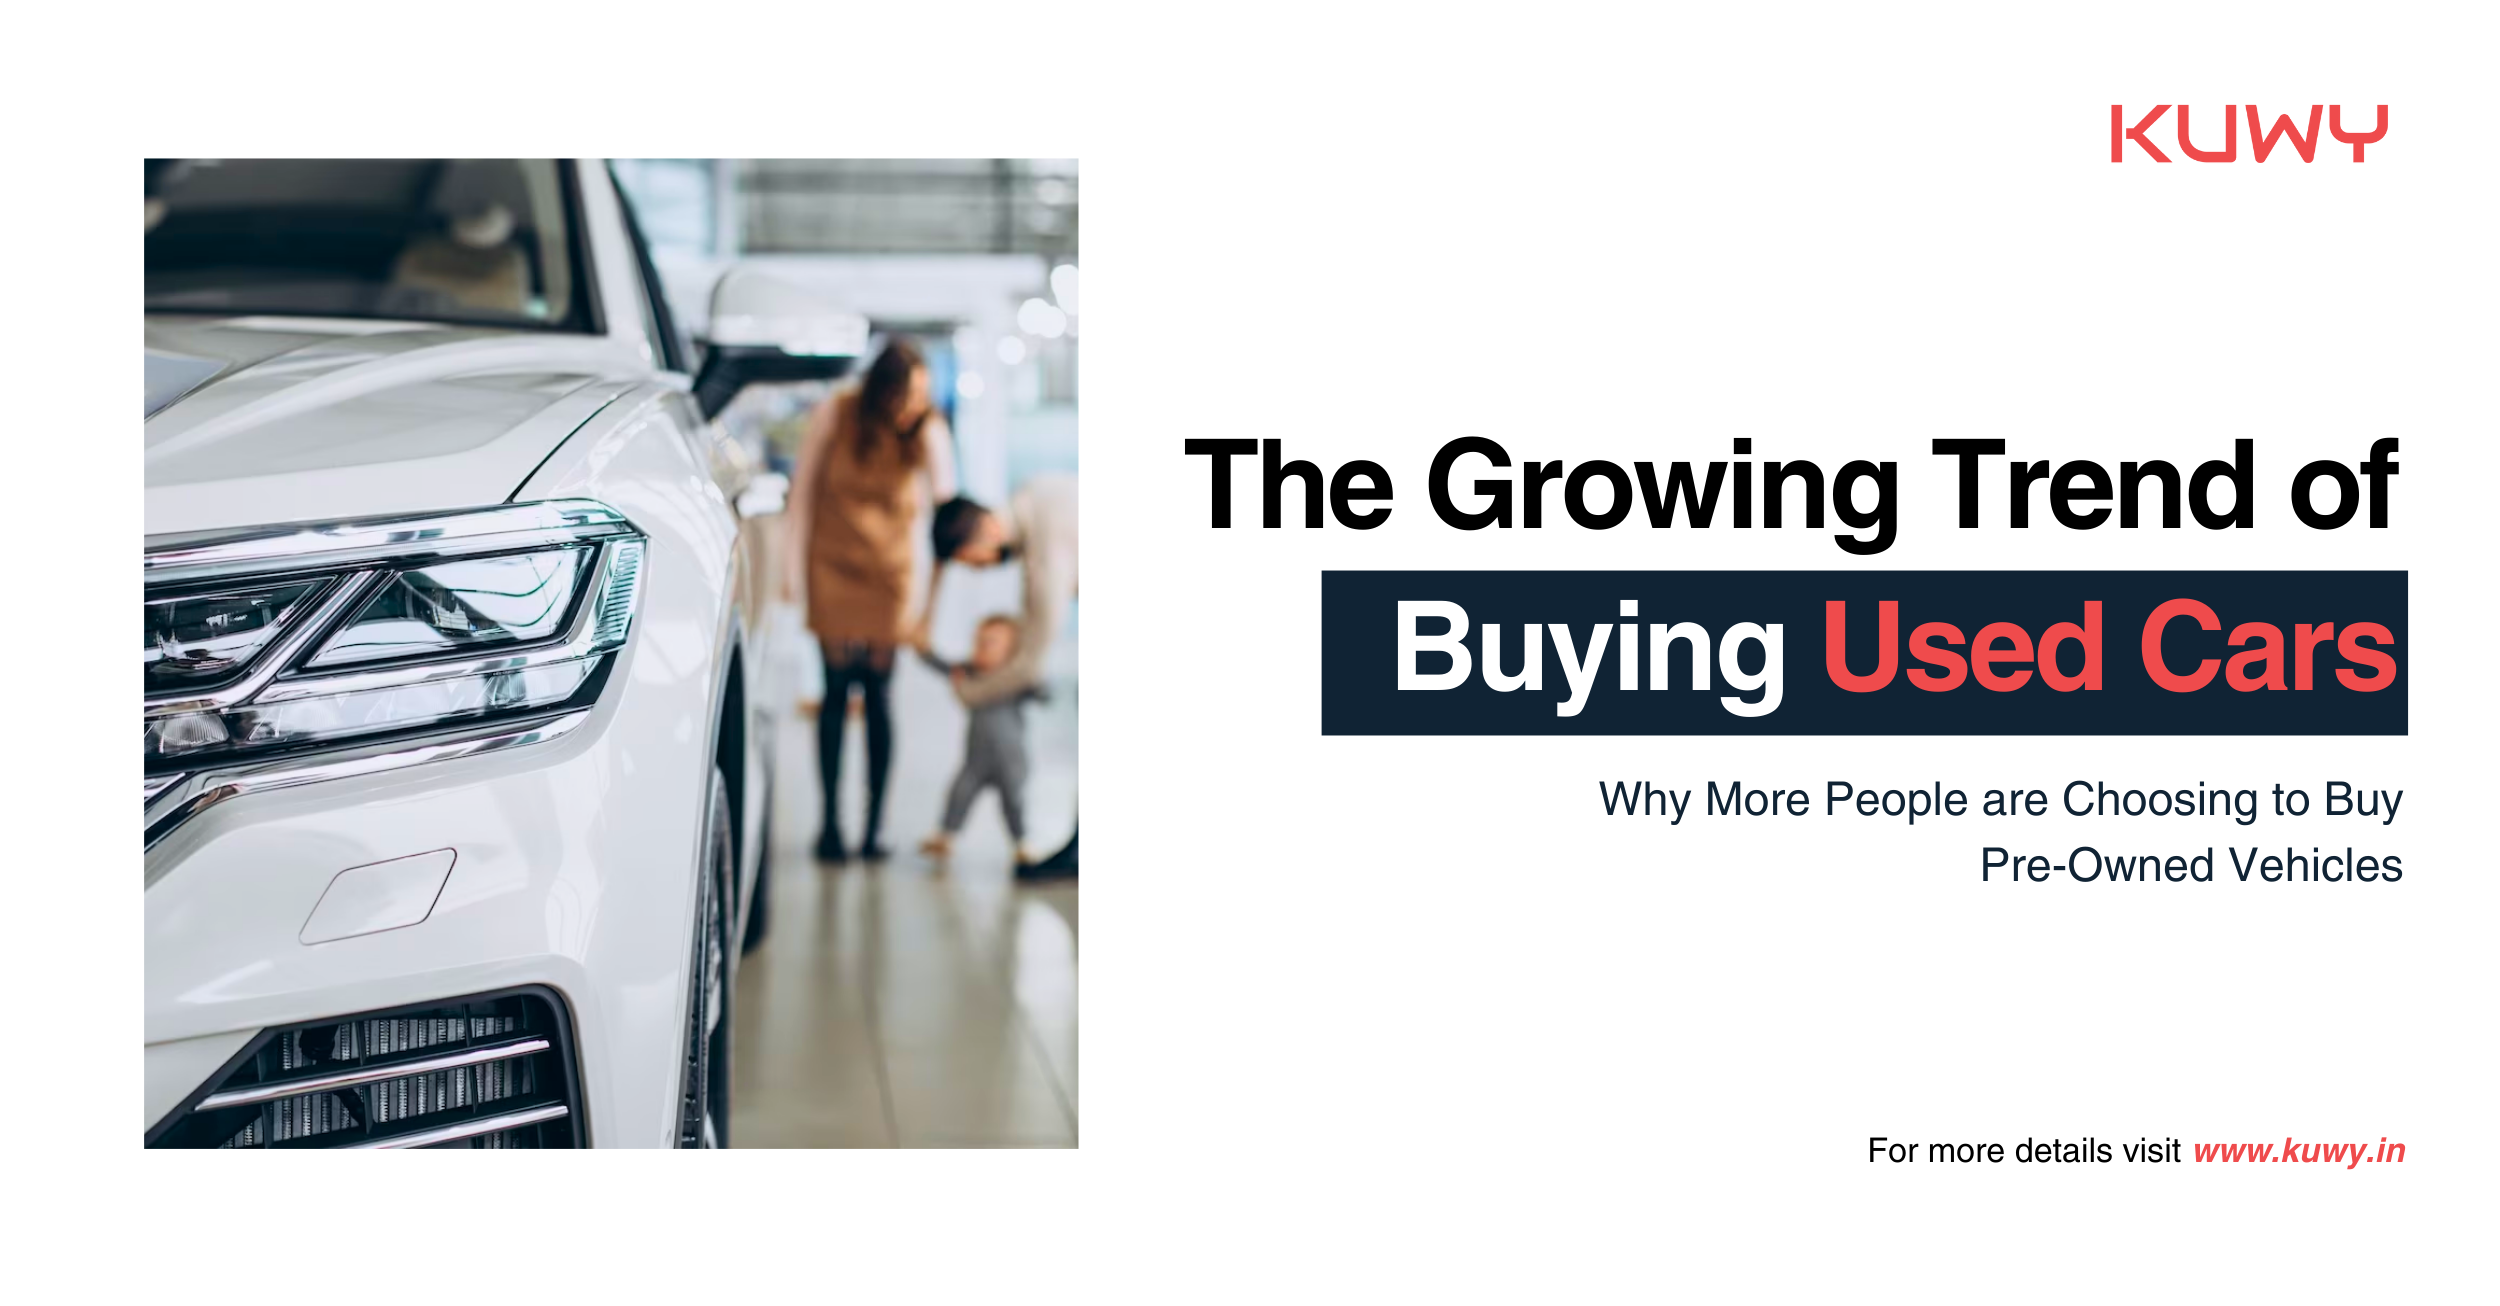 The Growing Trend of Buying Used Cars: Why More People are Choosing to Buy Pre-Owned Vehicles